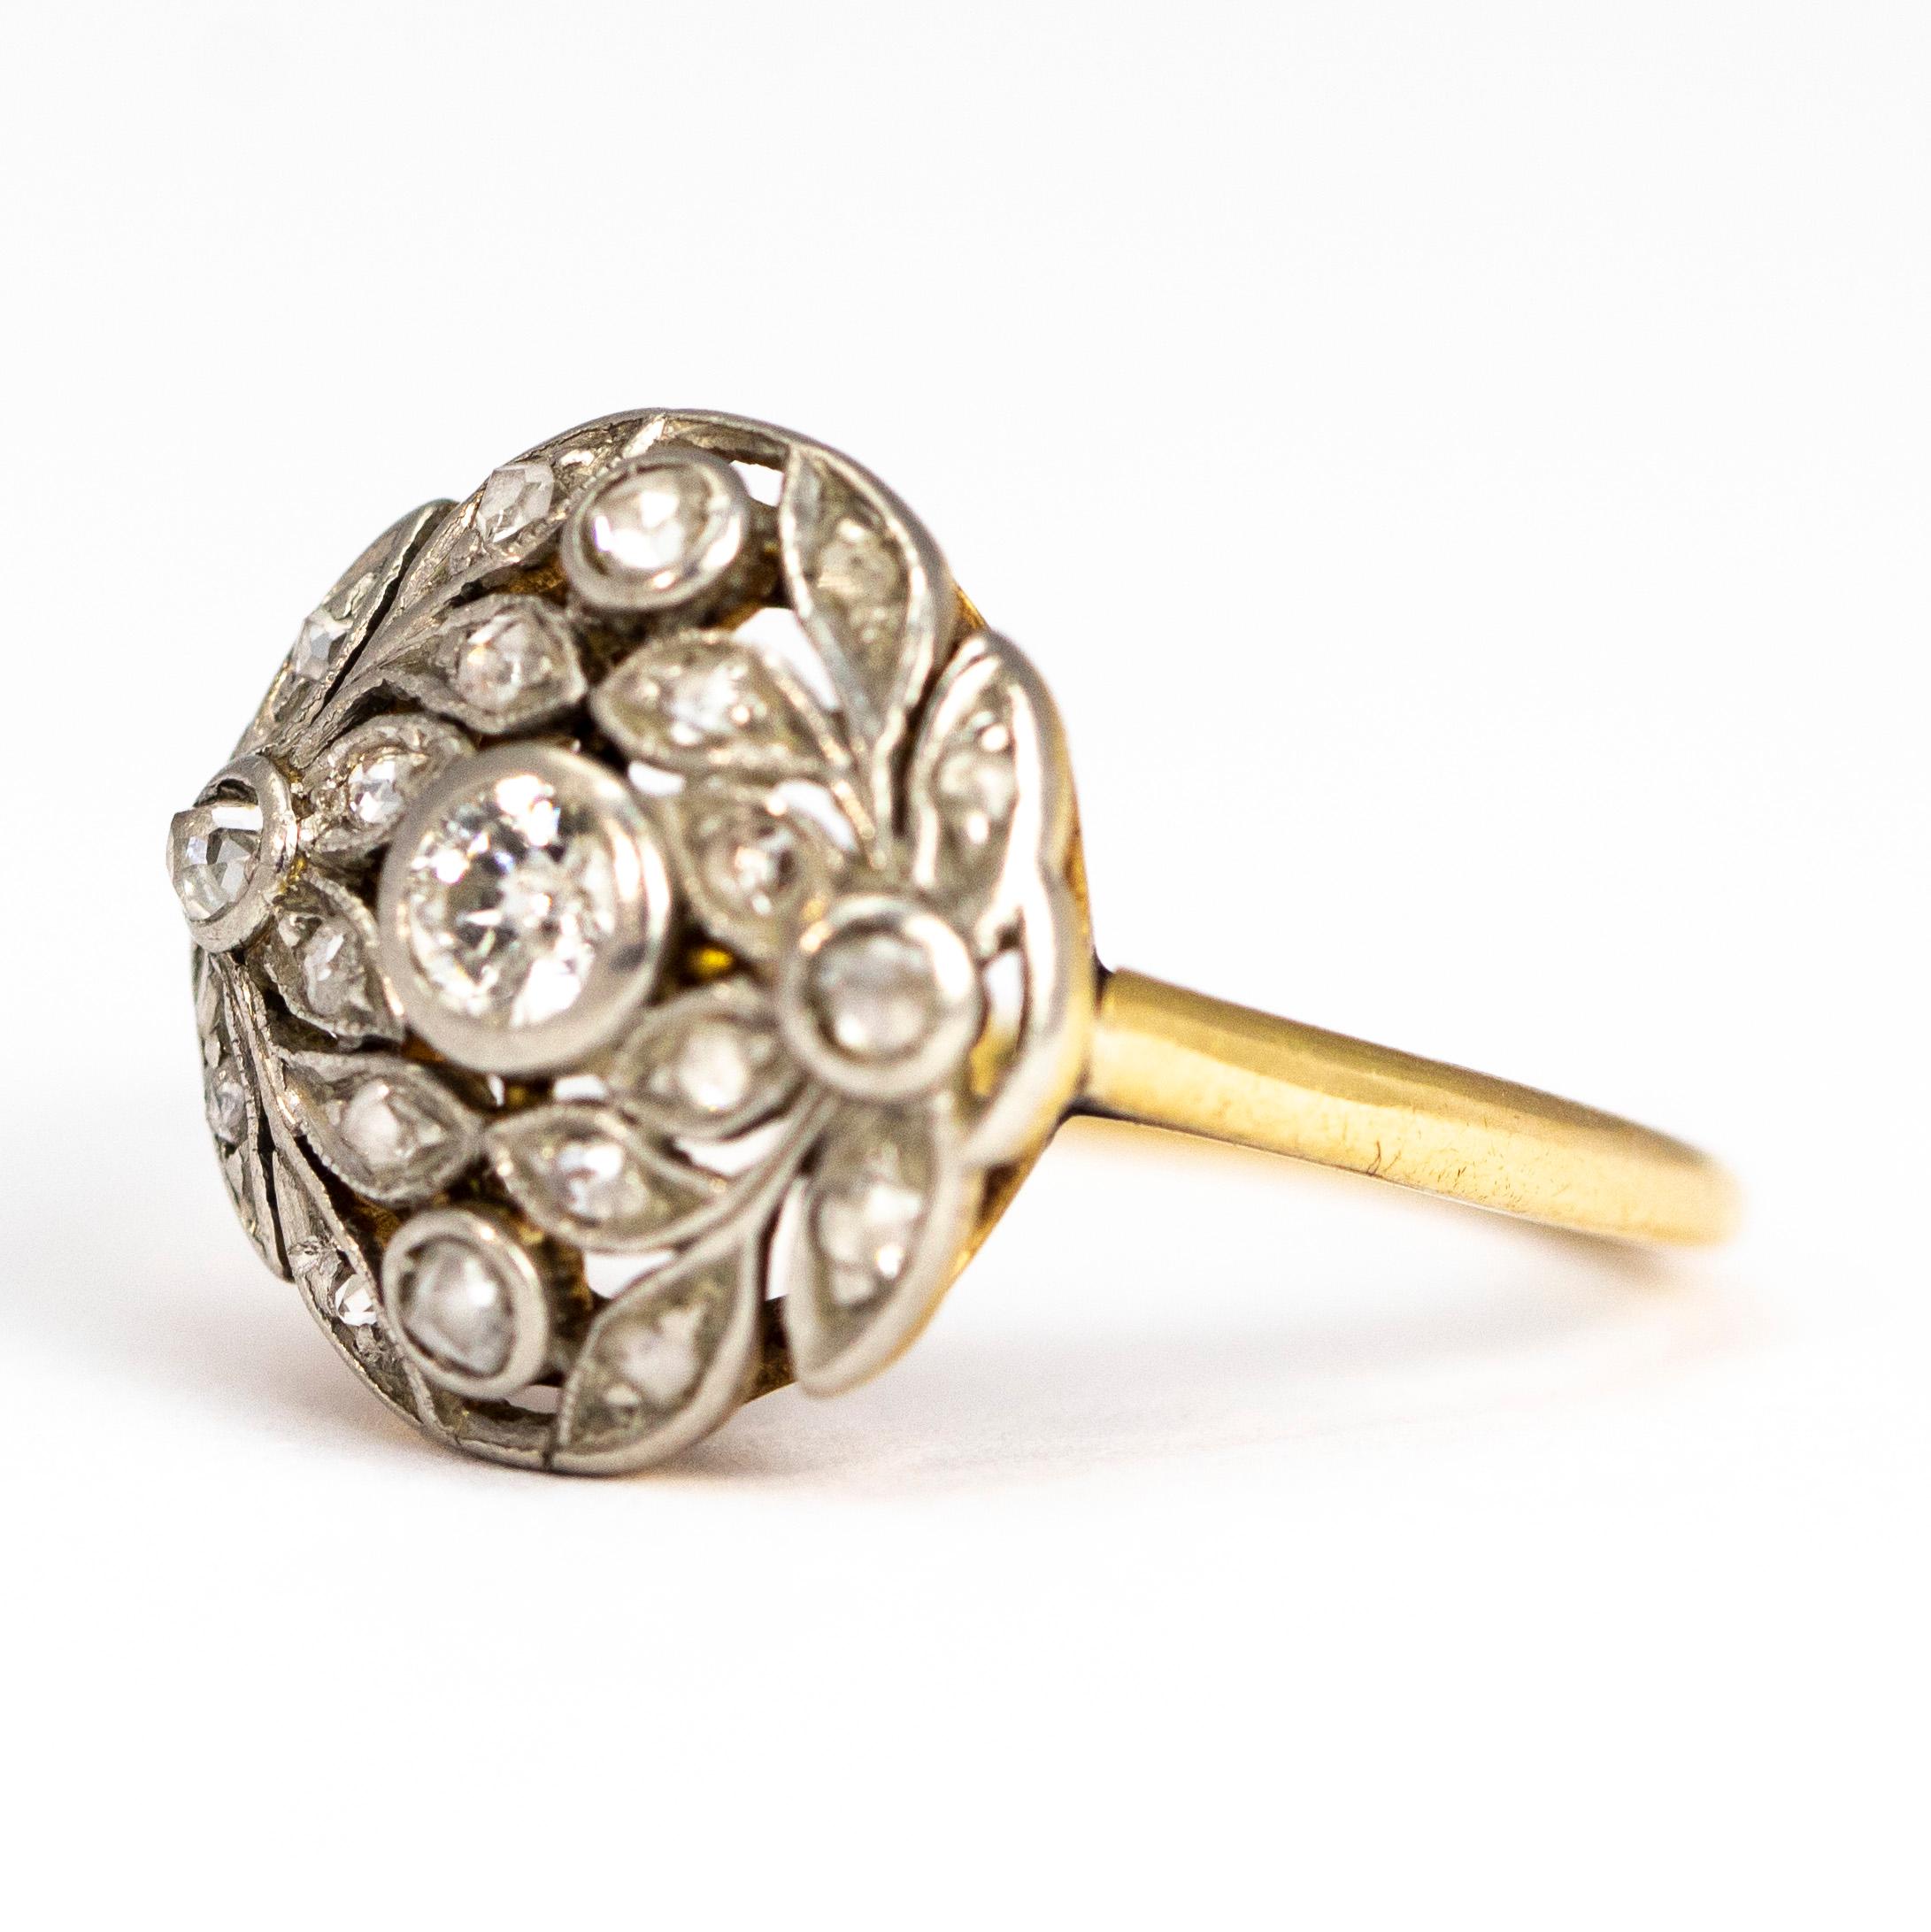 This ornate piece holds gorgeous sparkling diamonds. At the centre there is a 20pt Old Mine Cut diamond and scattered around this in leaf style settings are rose cut diamonds. The ring is modelled in 18ct gold and the stones are set in